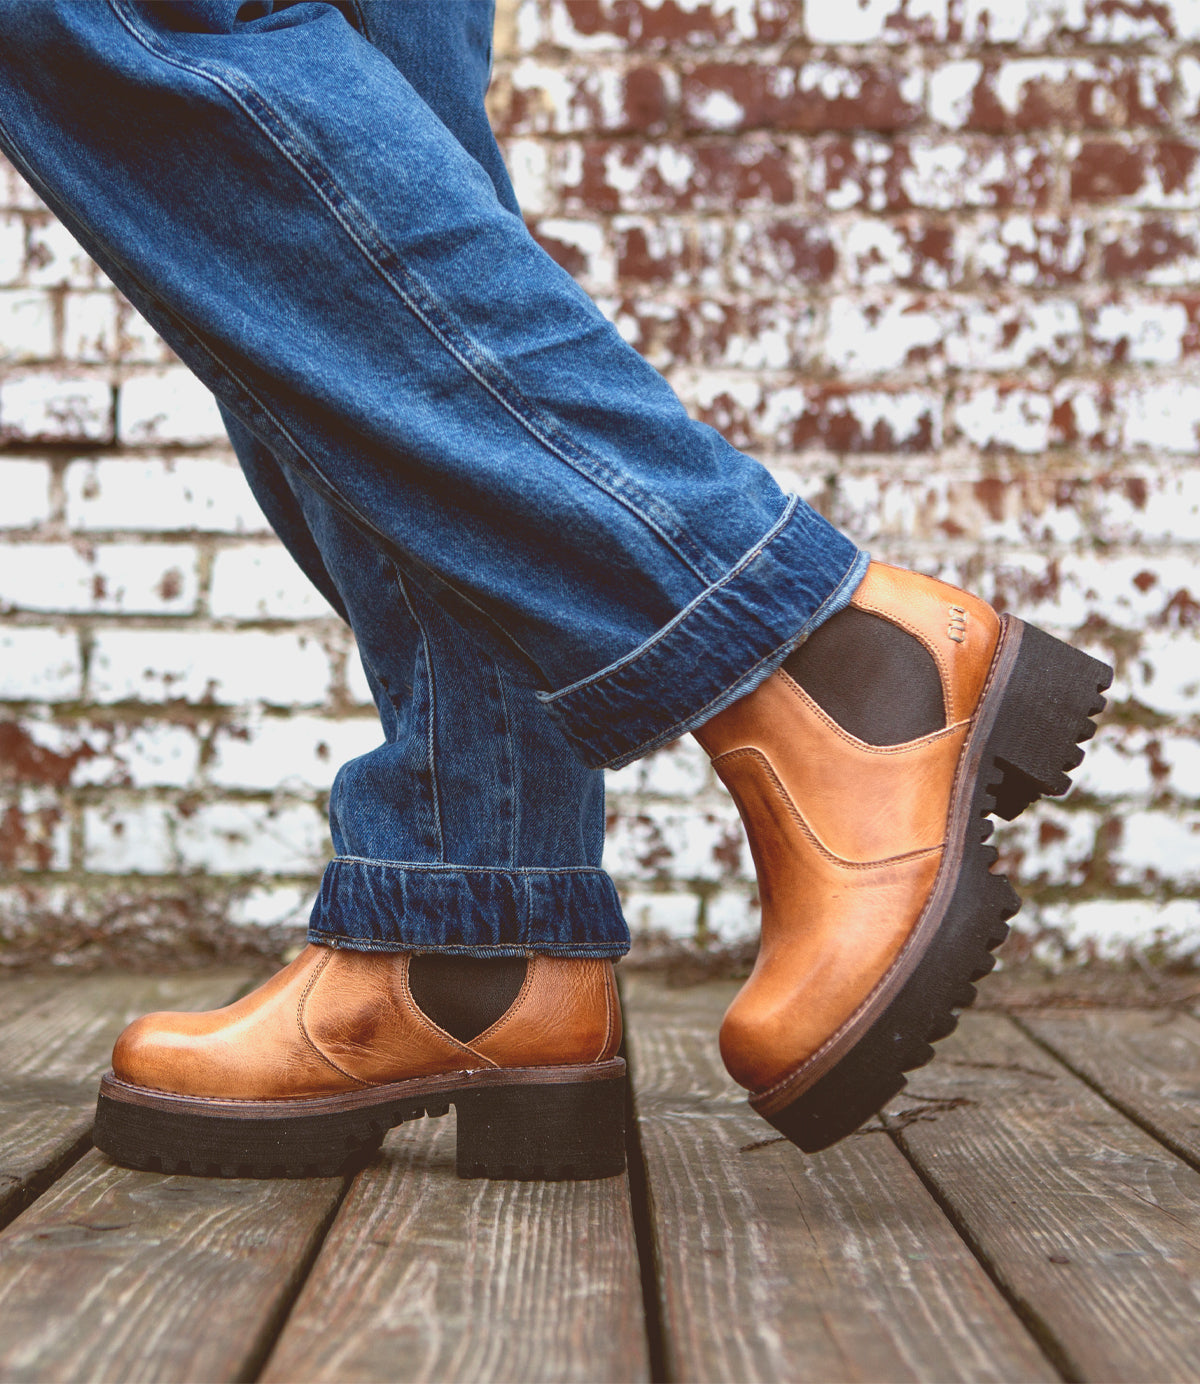 A person wearing a outfit consisting of a pair of Valda Hi jeans styled with a pair of Bed Stu tan Chelsea boots.